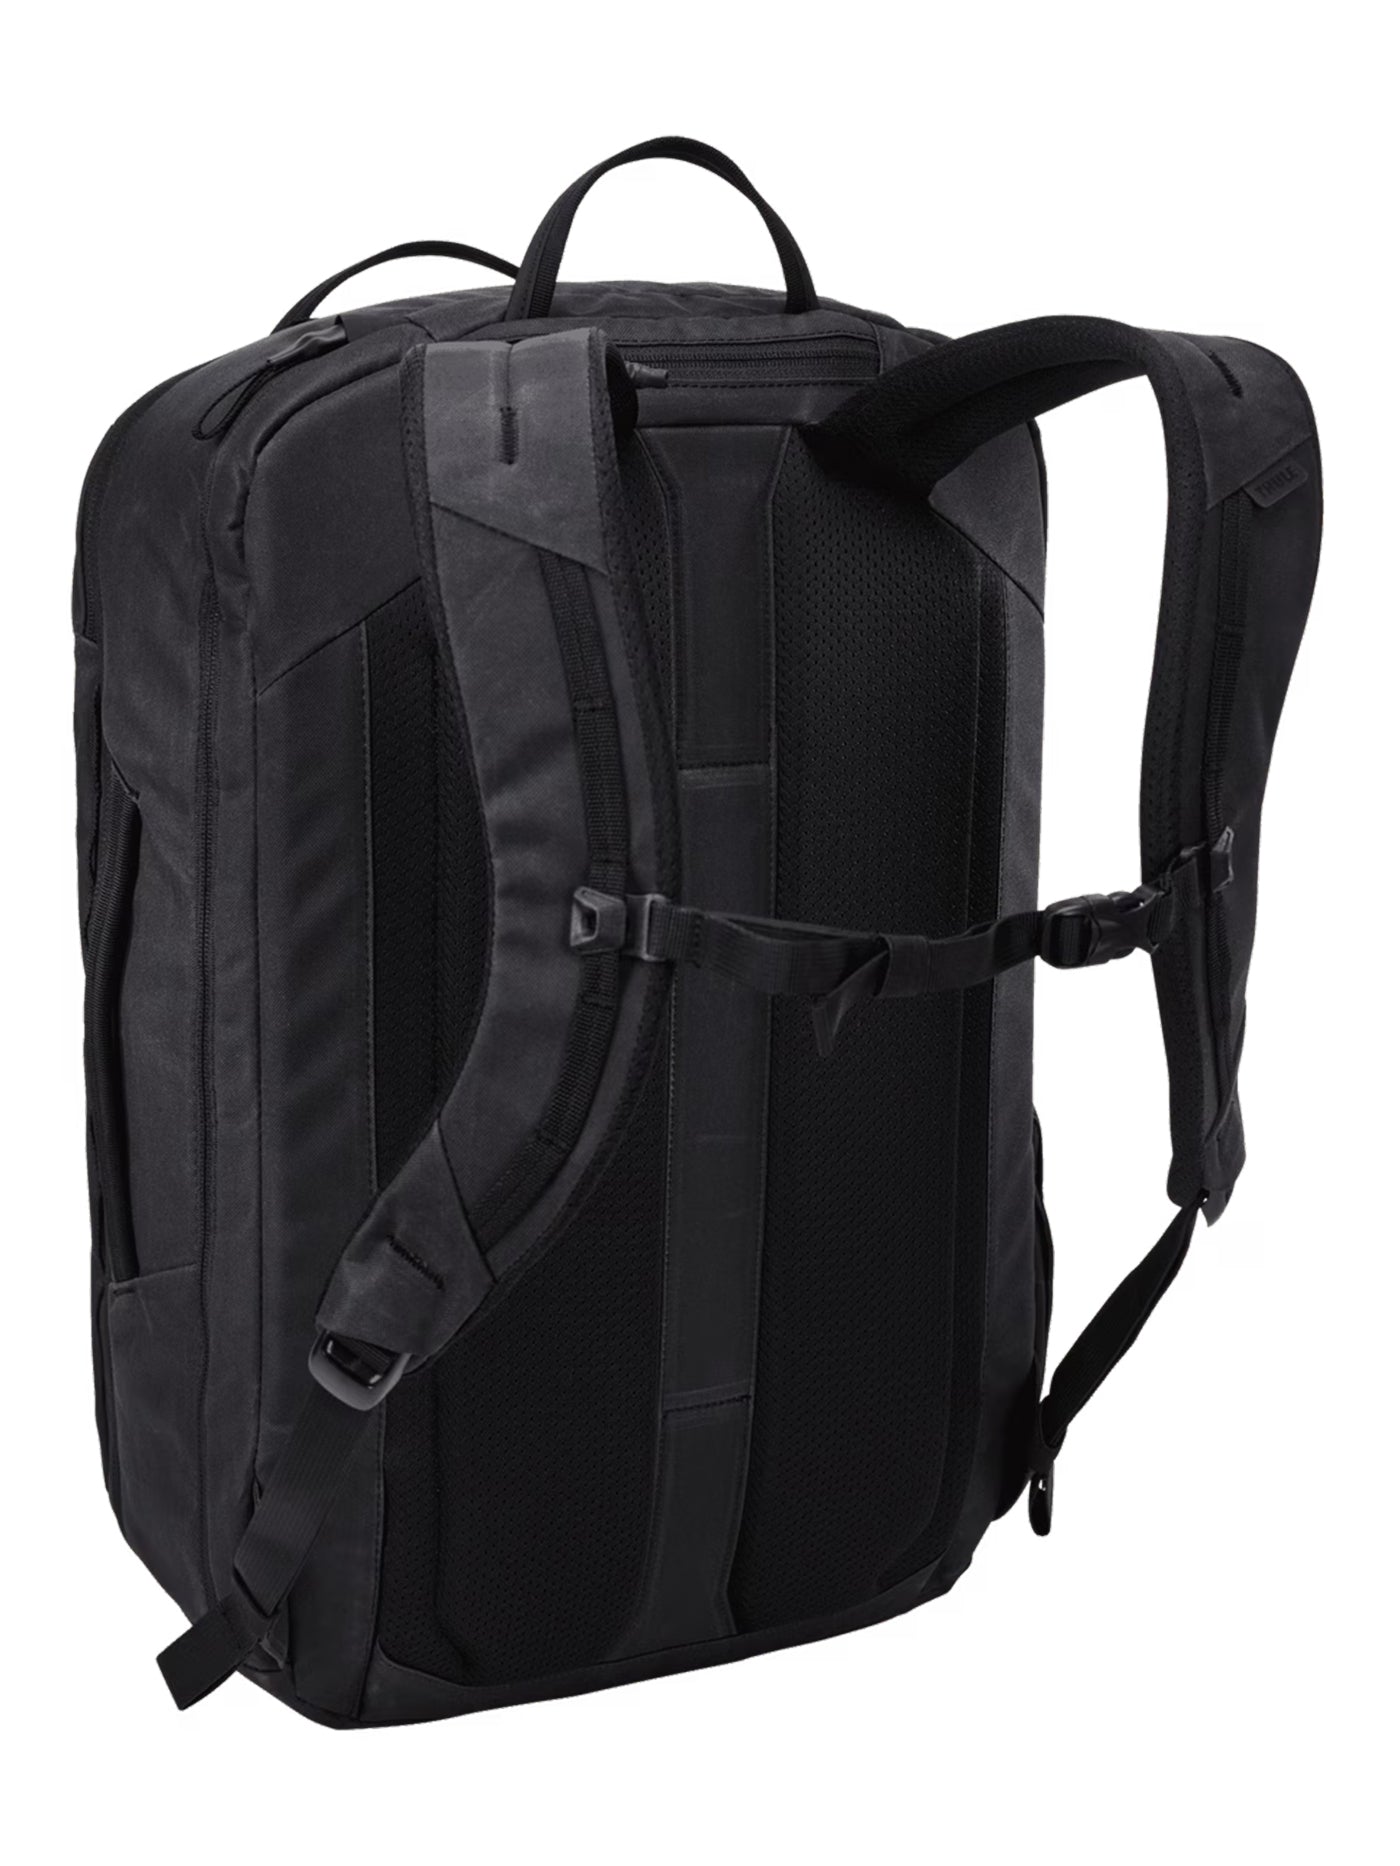 Thule Aion 40L Black Backpack